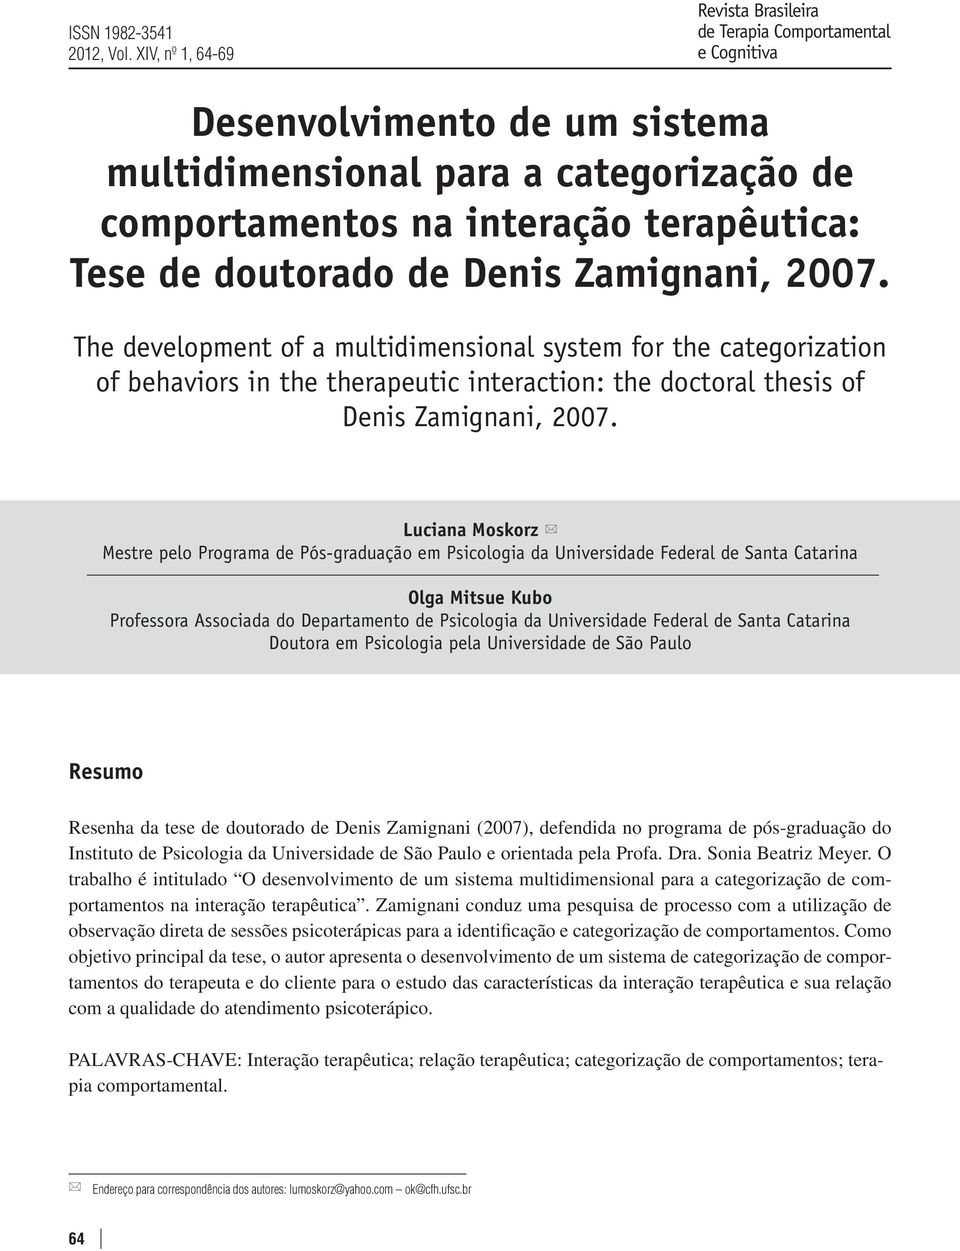 doutorado de Denis Zamignani, 2007. The development of a multidimensional system for the categorization of behaviors in the therapeutic interaction: the doctoral thesis of Denis Zamignani, 2007.